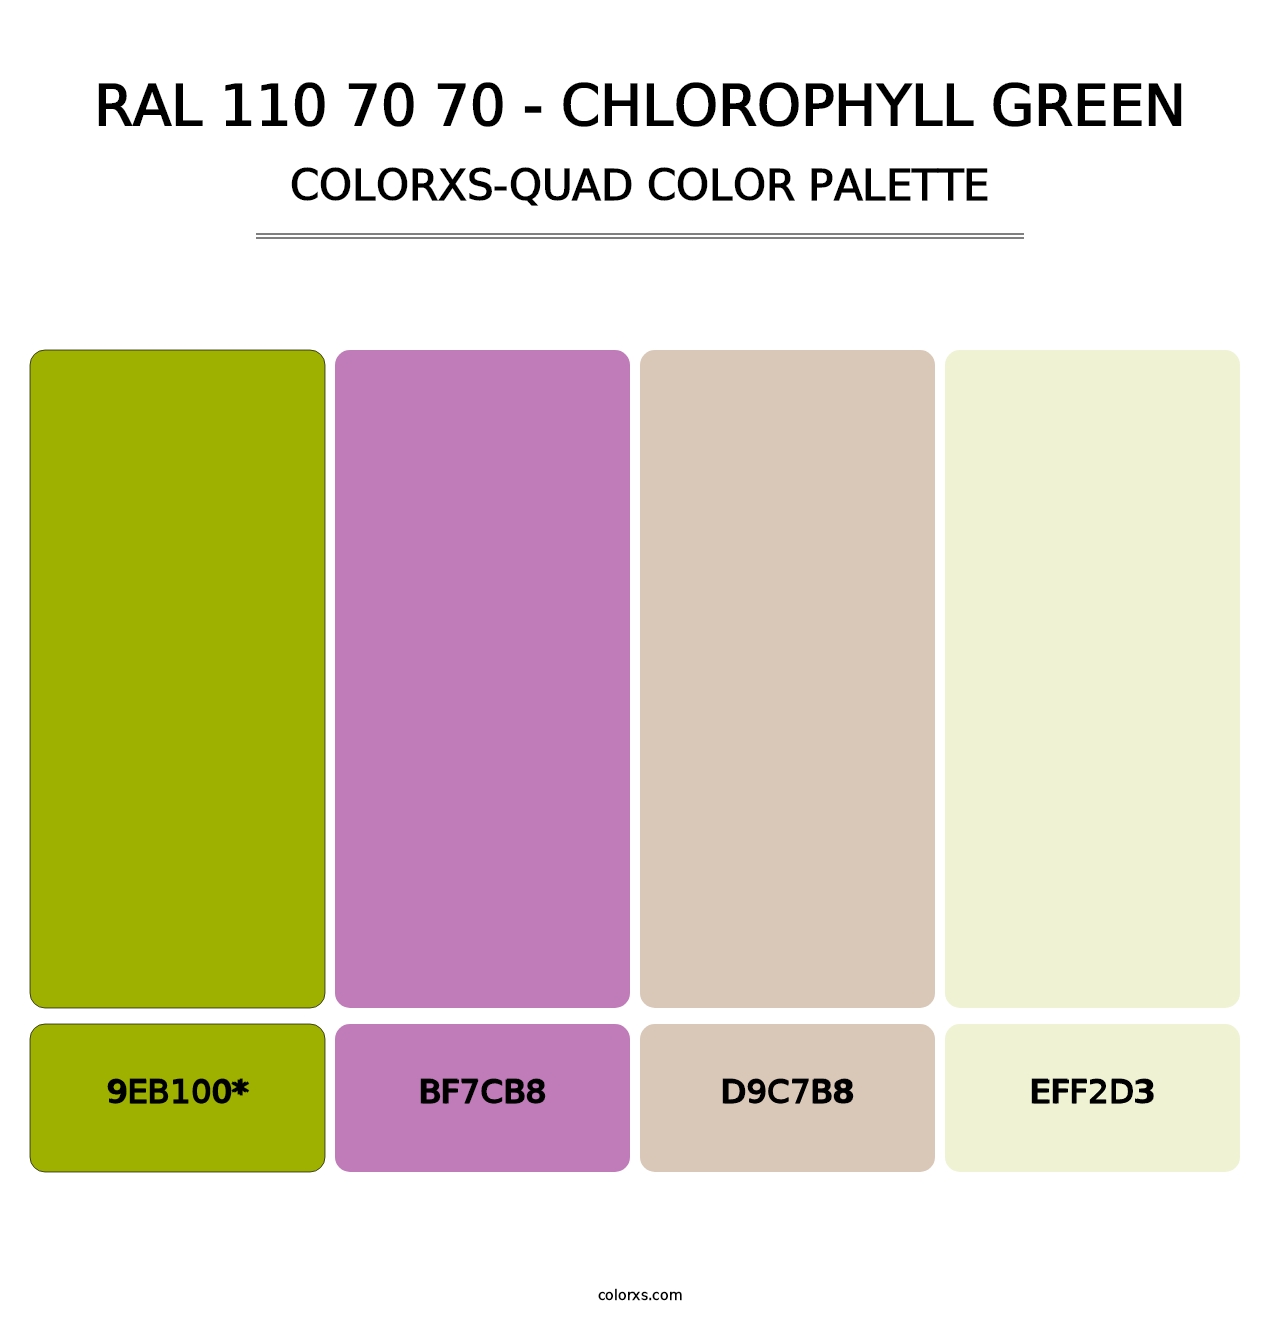 RAL 110 70 70 - Chlorophyll Green - Colorxs Quad Palette